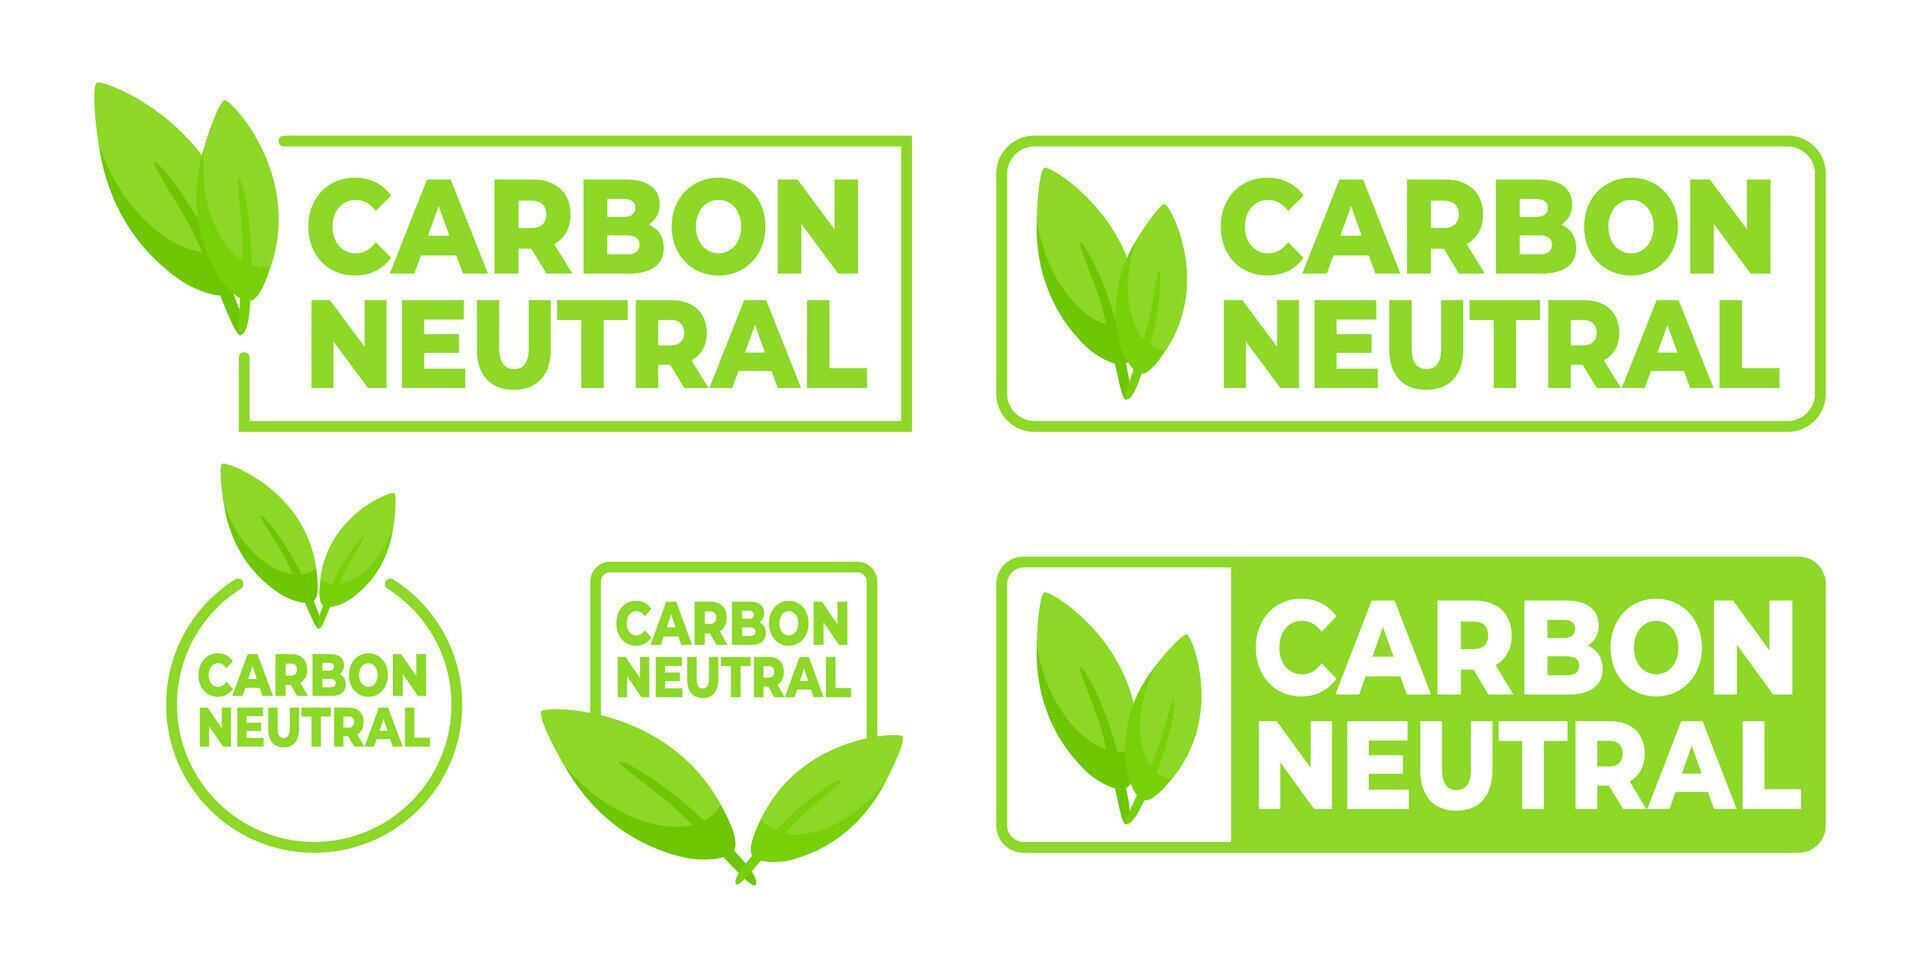 Environmentally conscious labels in green with Carbon Neutral text and a leaf symbol, for products supporting sustainable practices. vector